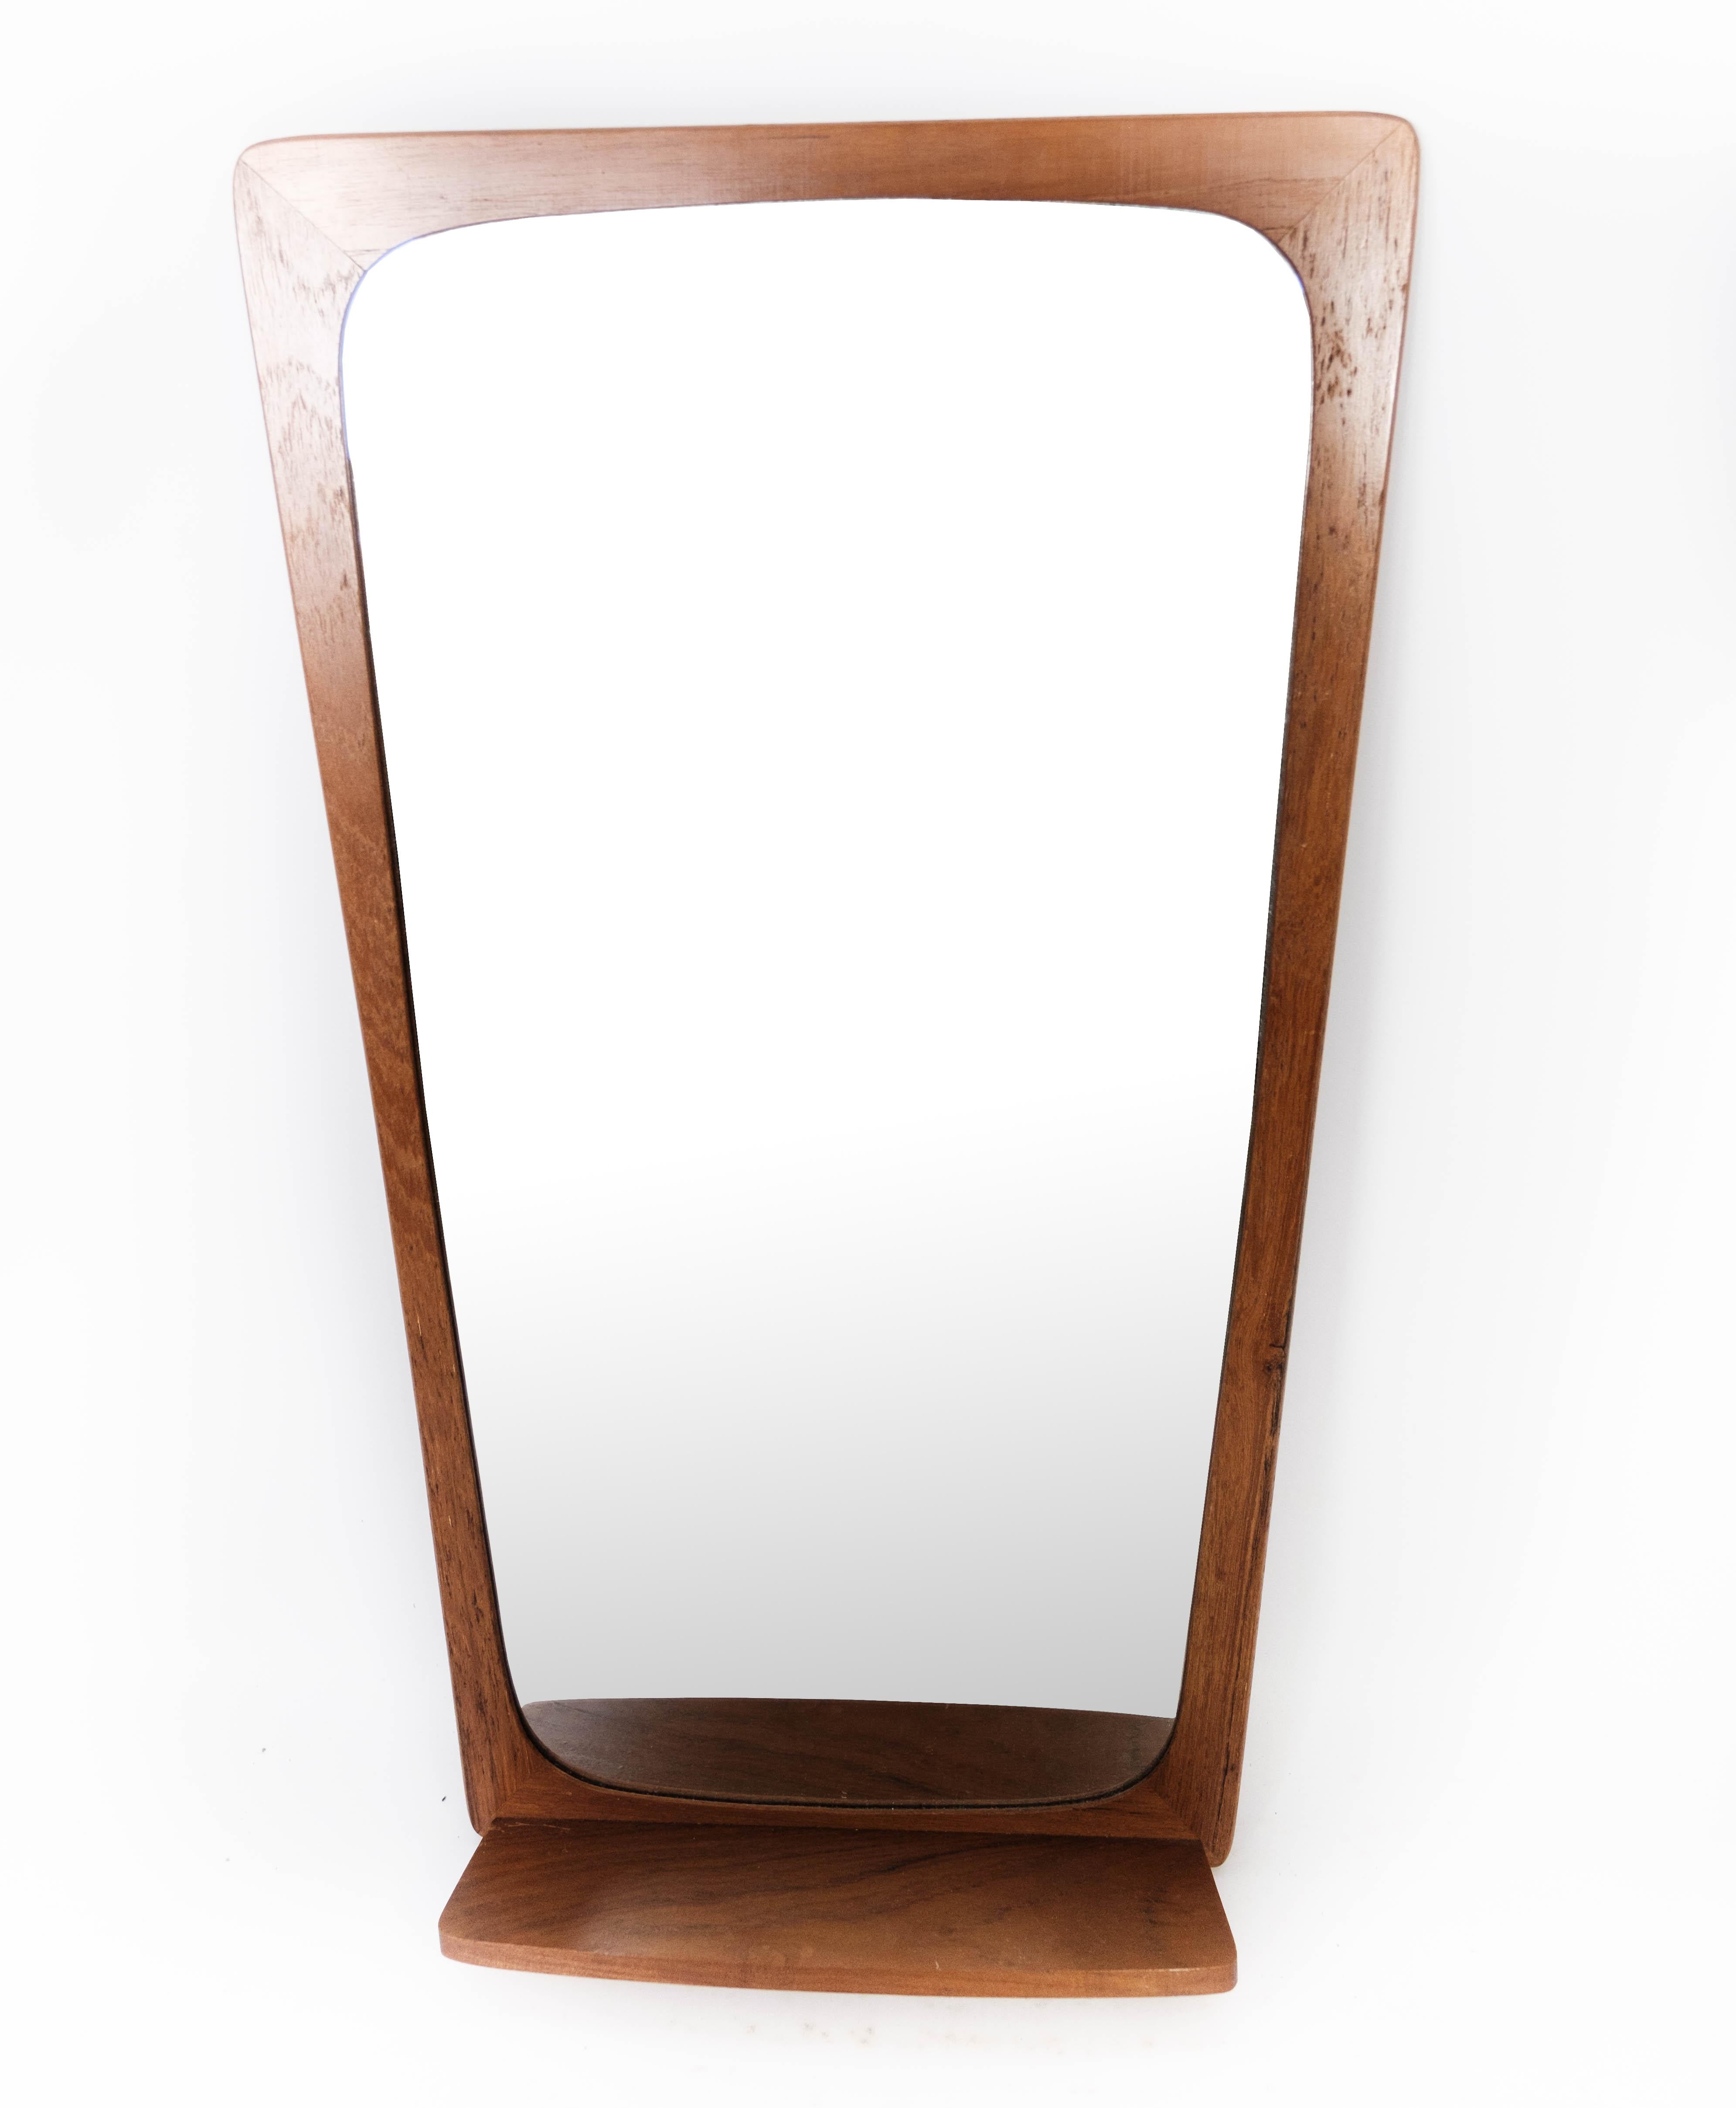 Mirror Made In Teak With Shelf, Danish Design From 1960s In Good Condition For Sale In Lejre, DK